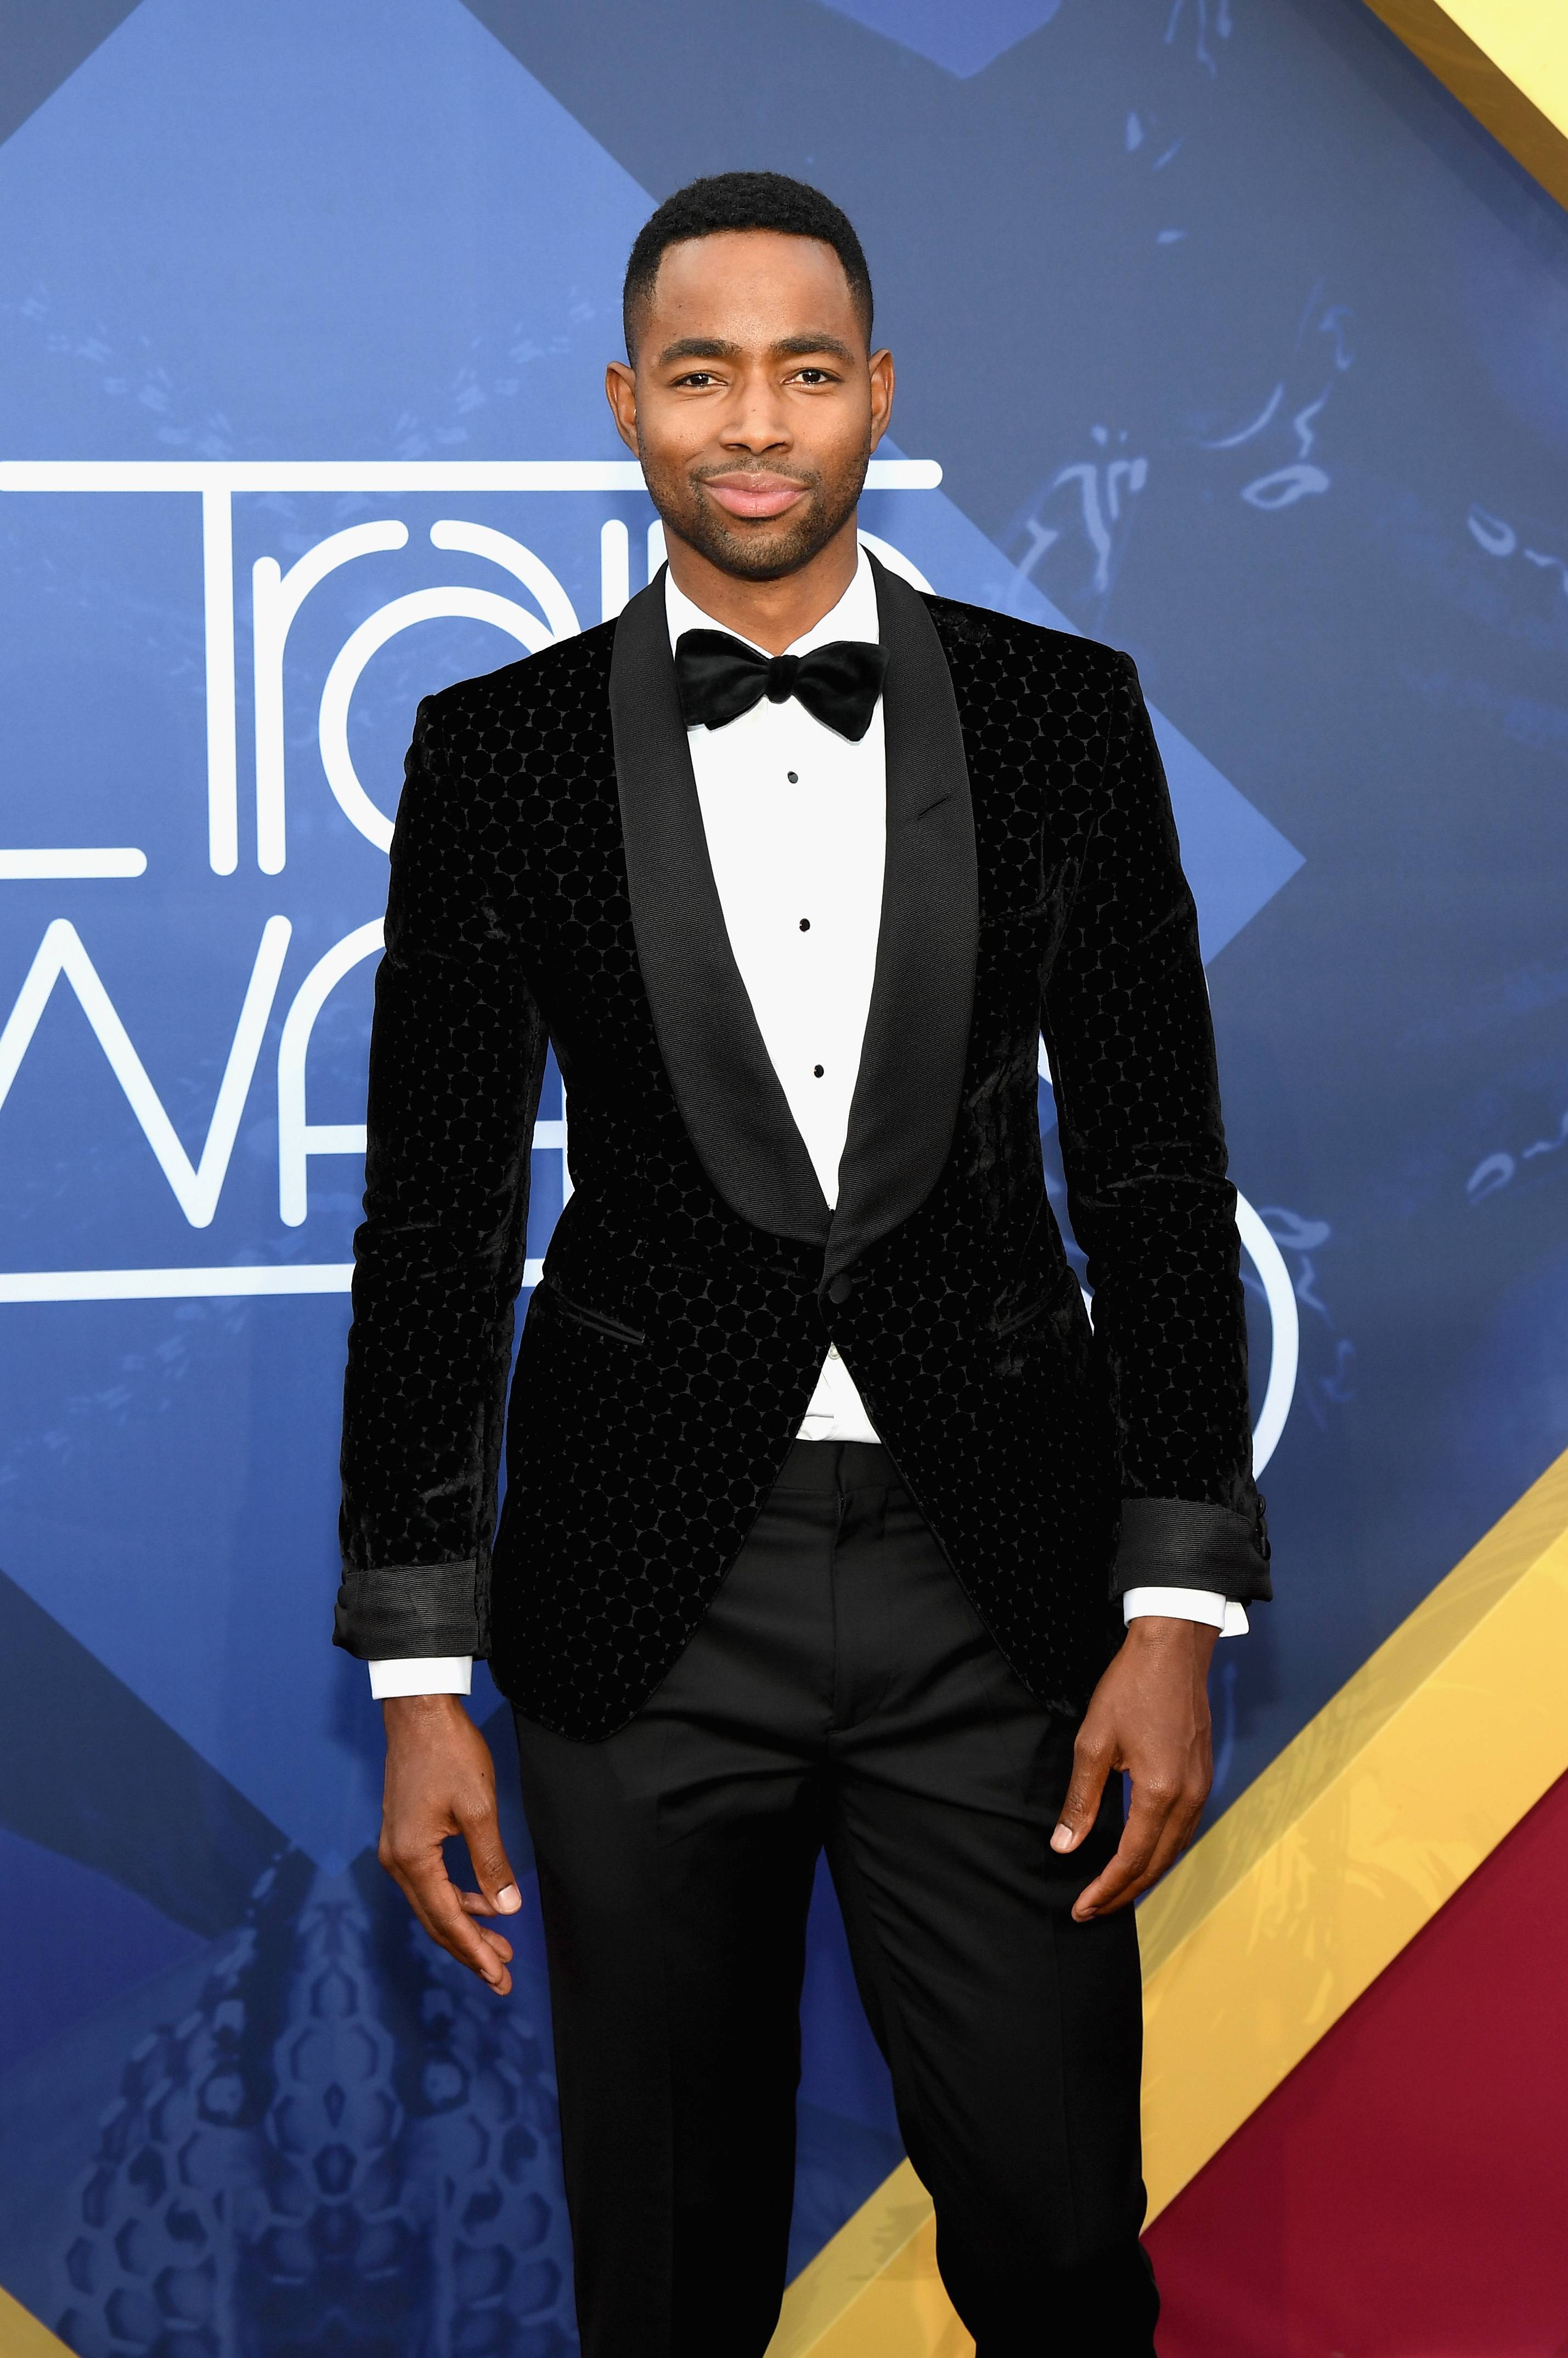 The Insecure star cleaned up nice for the 2016 Soul Train Awards.